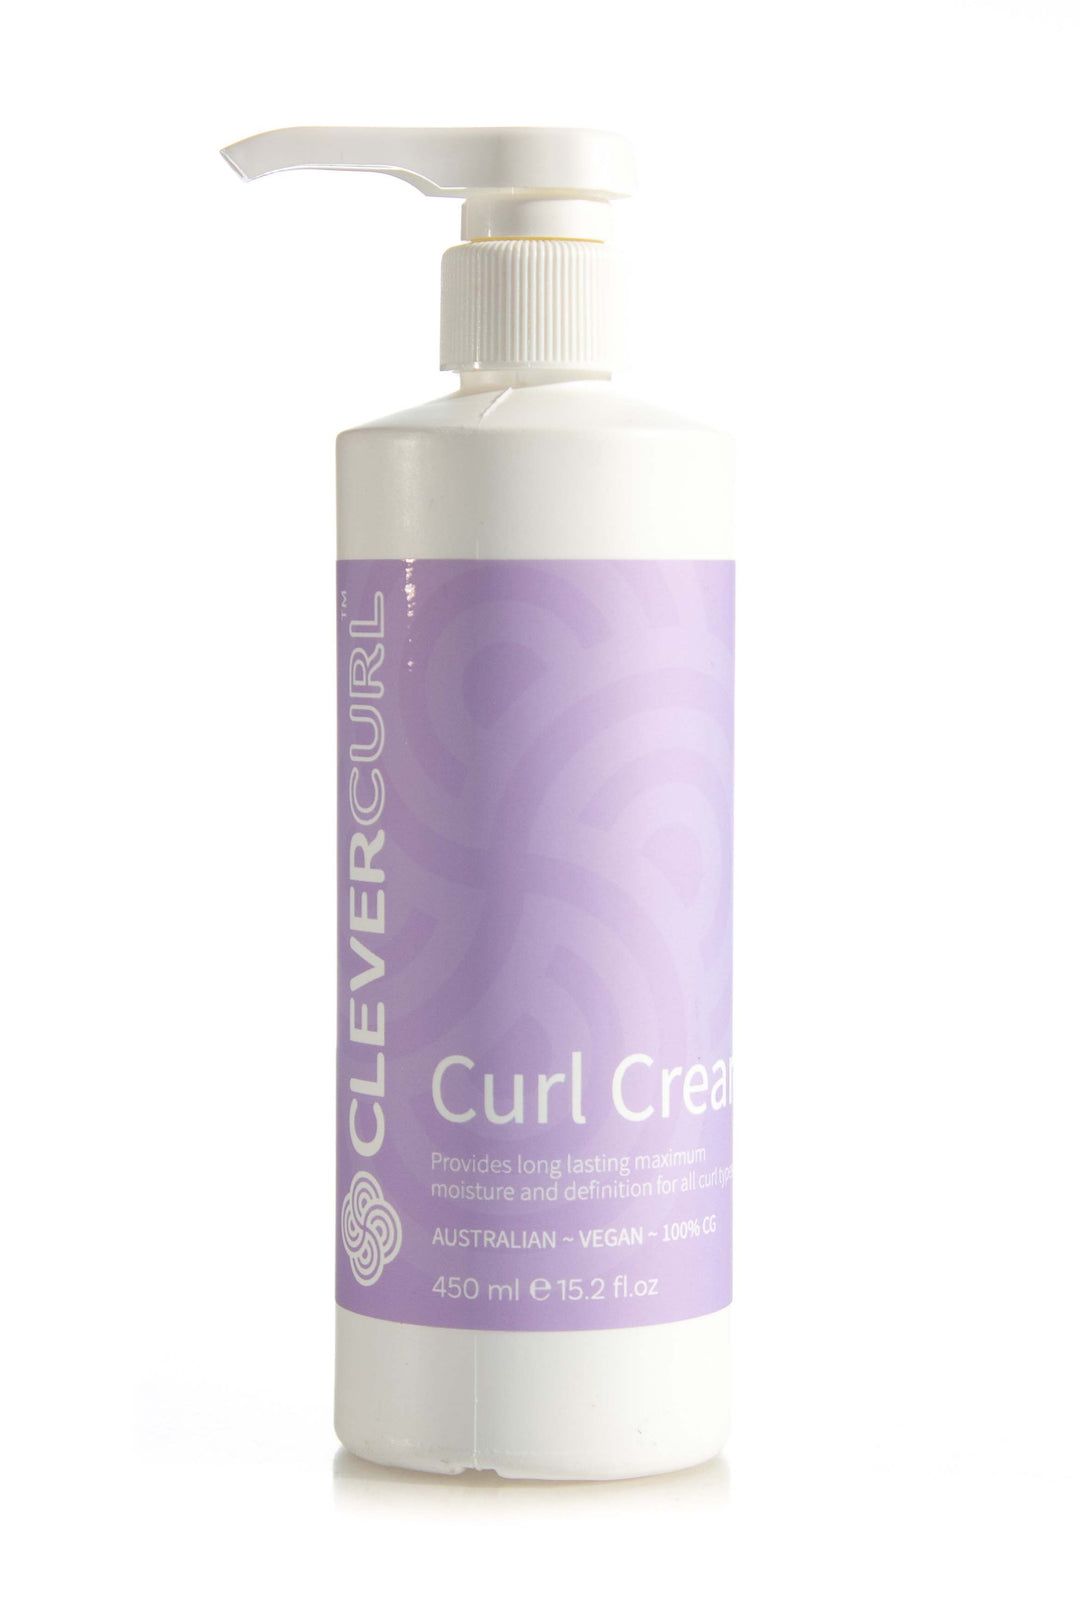 Product Image: Clever Curl Curl Cream - 450ml